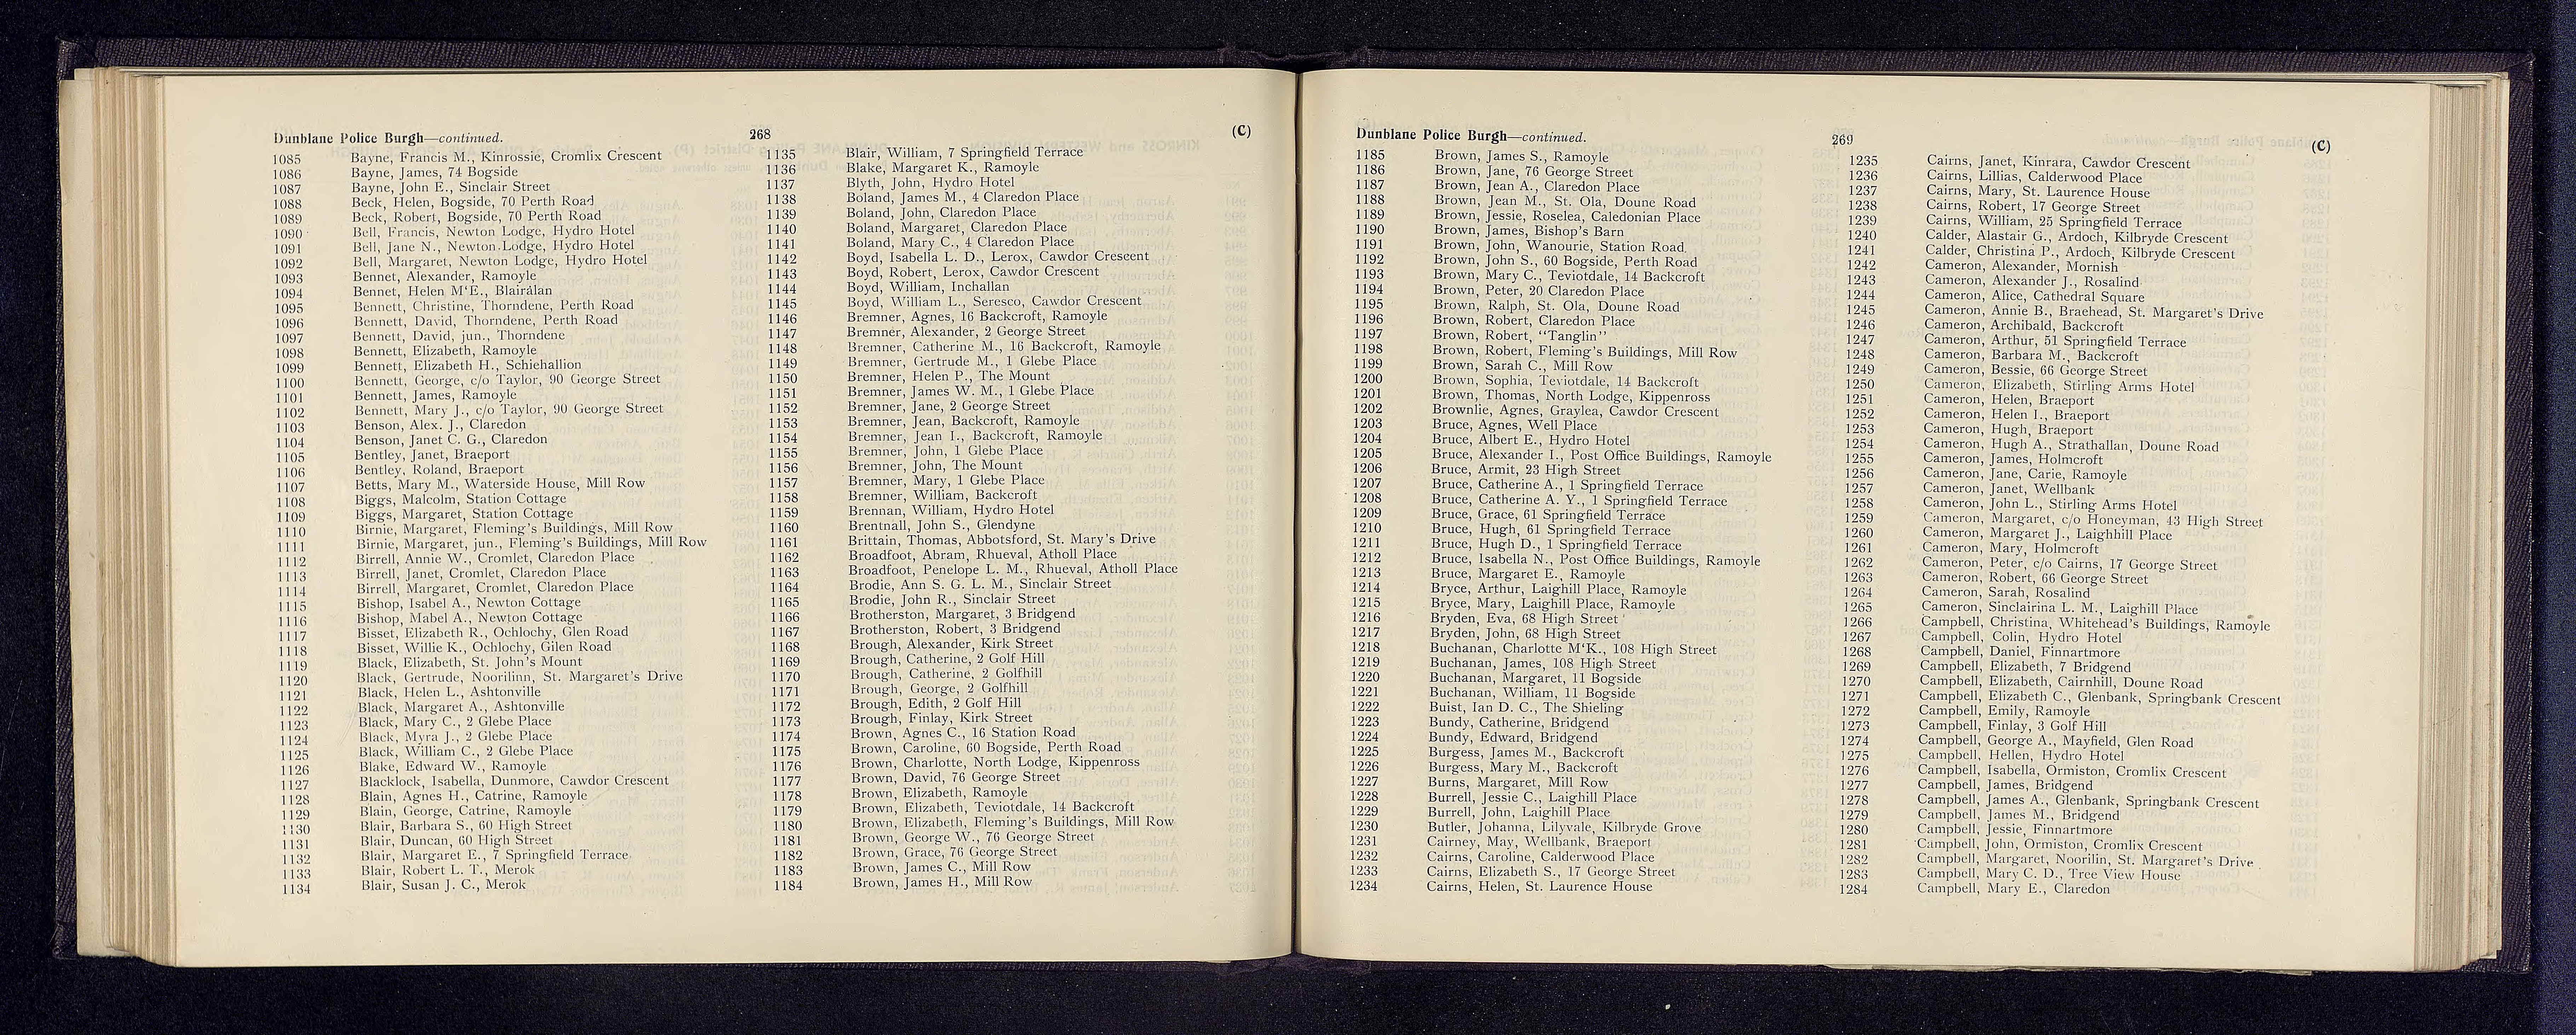 Perth and Kinross, Scotland, Electoral Registers, 1832-1961